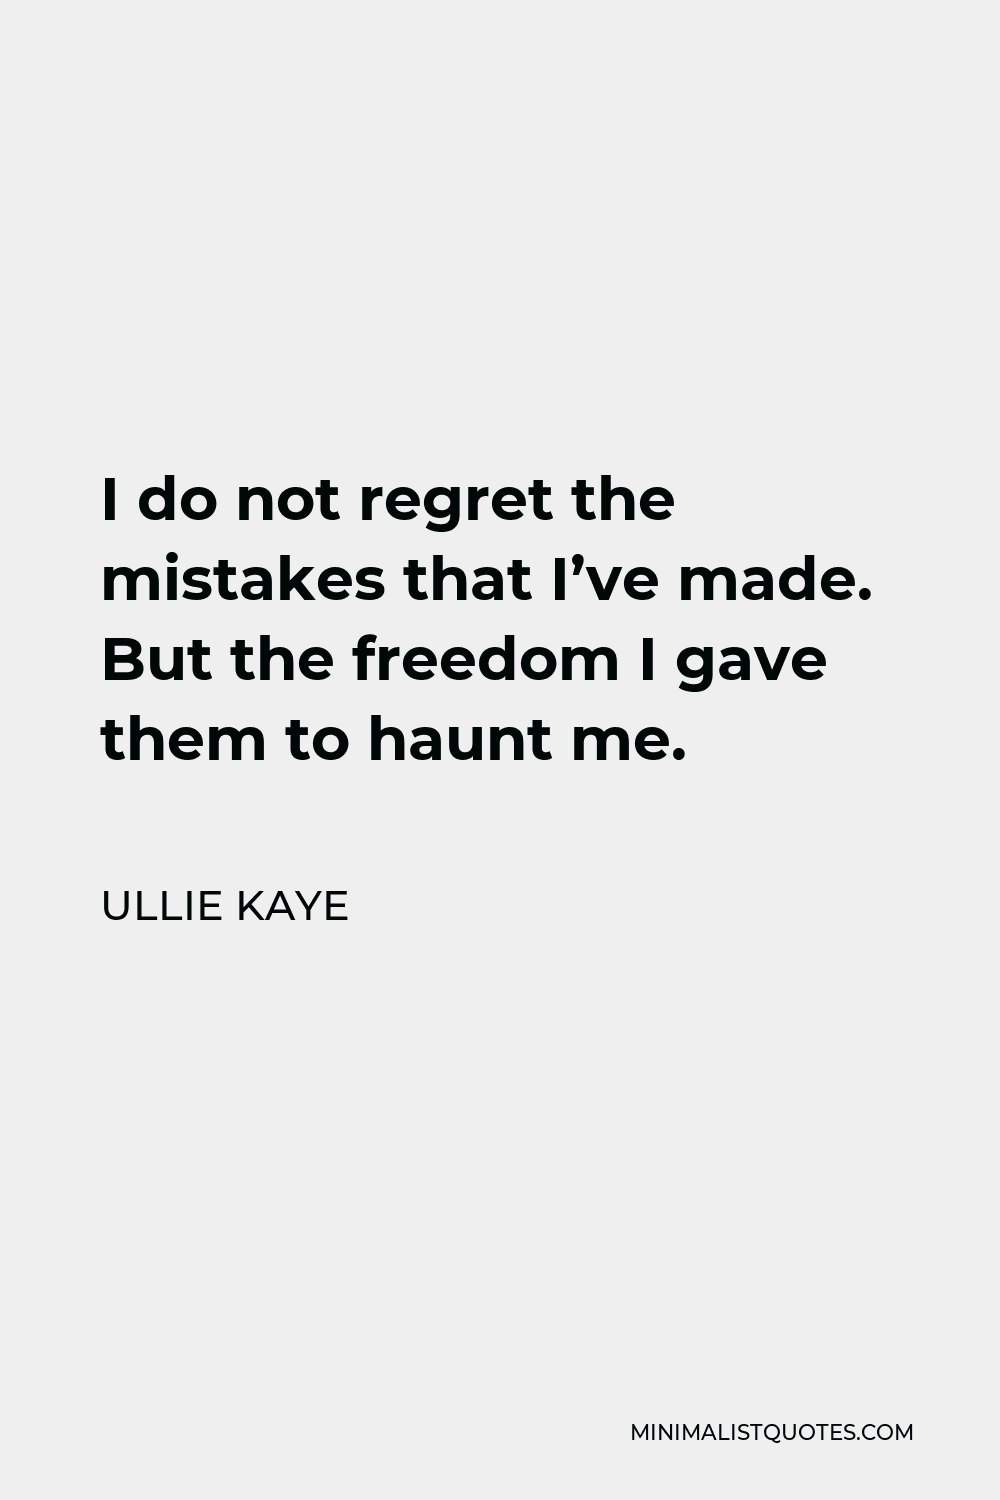 Ullie Kaye Quote - I do not regret the mistakes that I’ve made. But the freedom I gave them to haunt me.